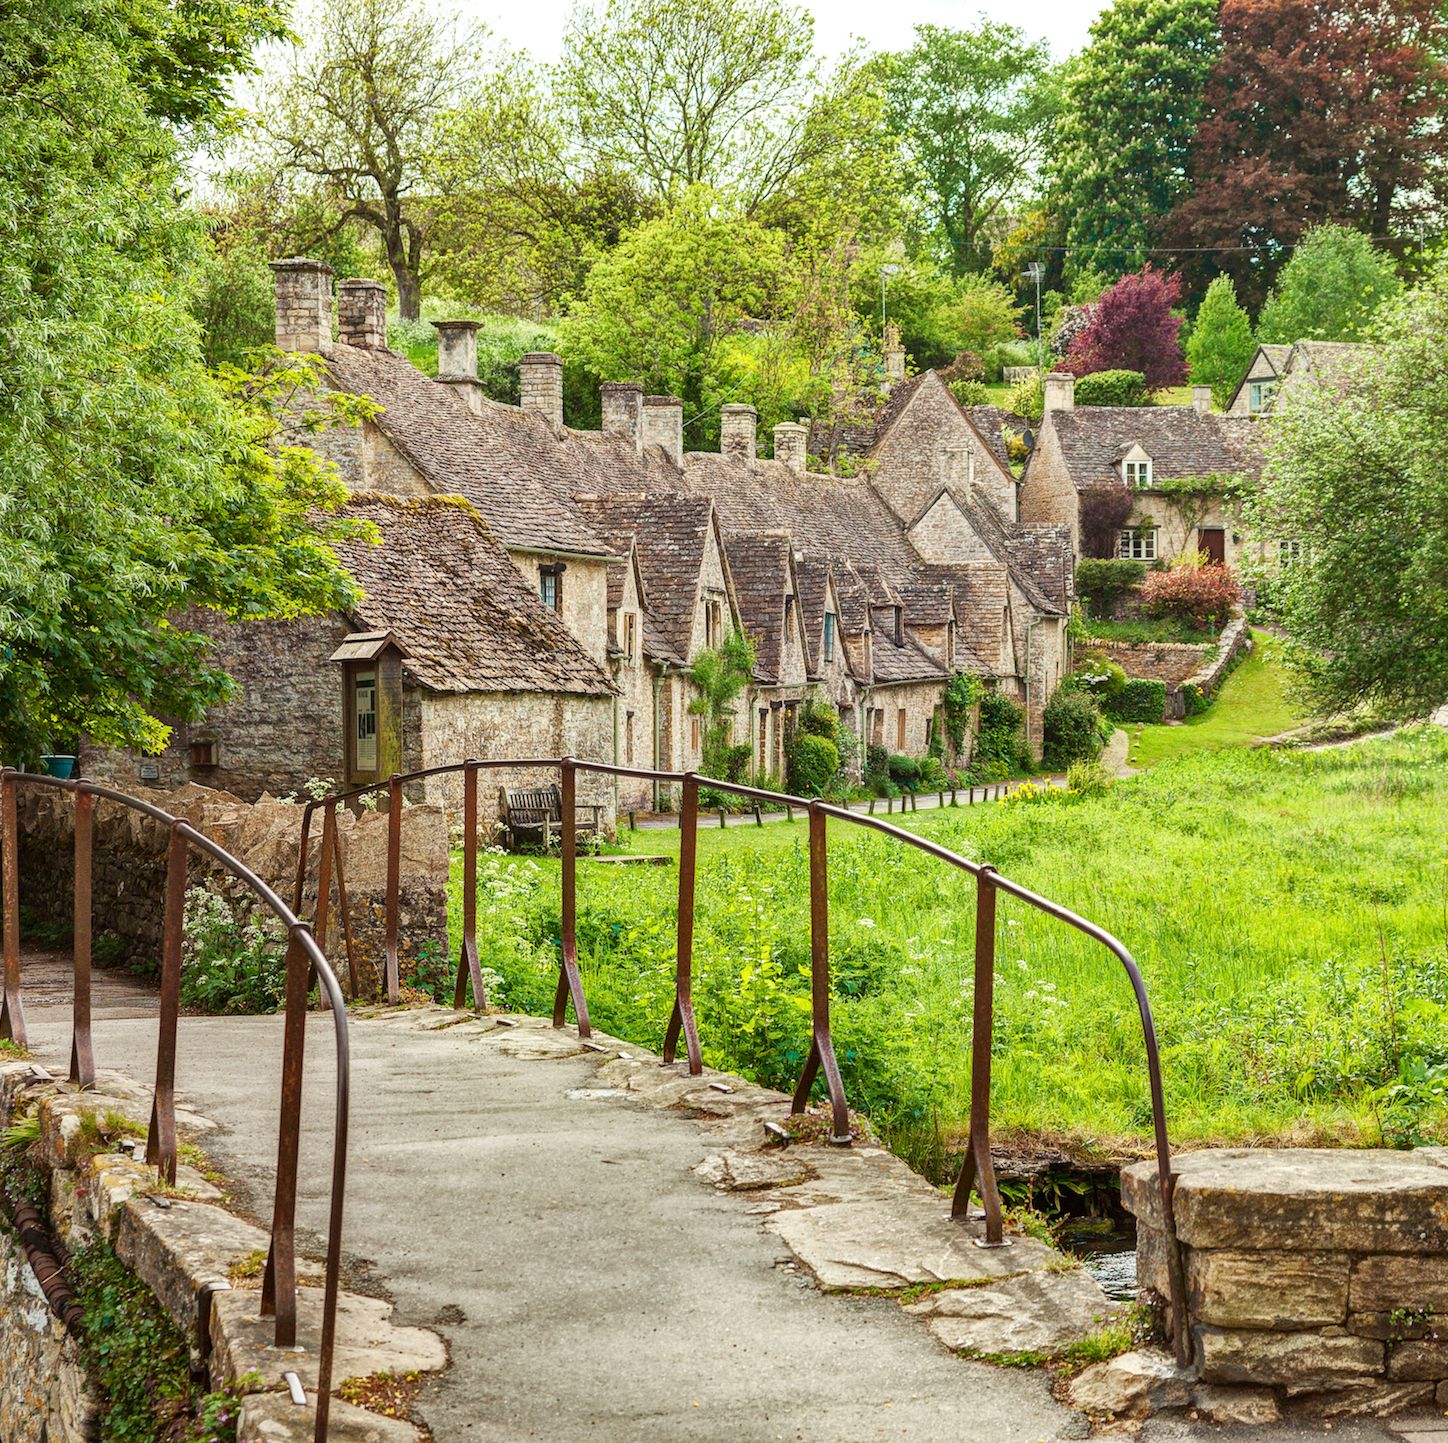 Most Instagrammable villages in the UK